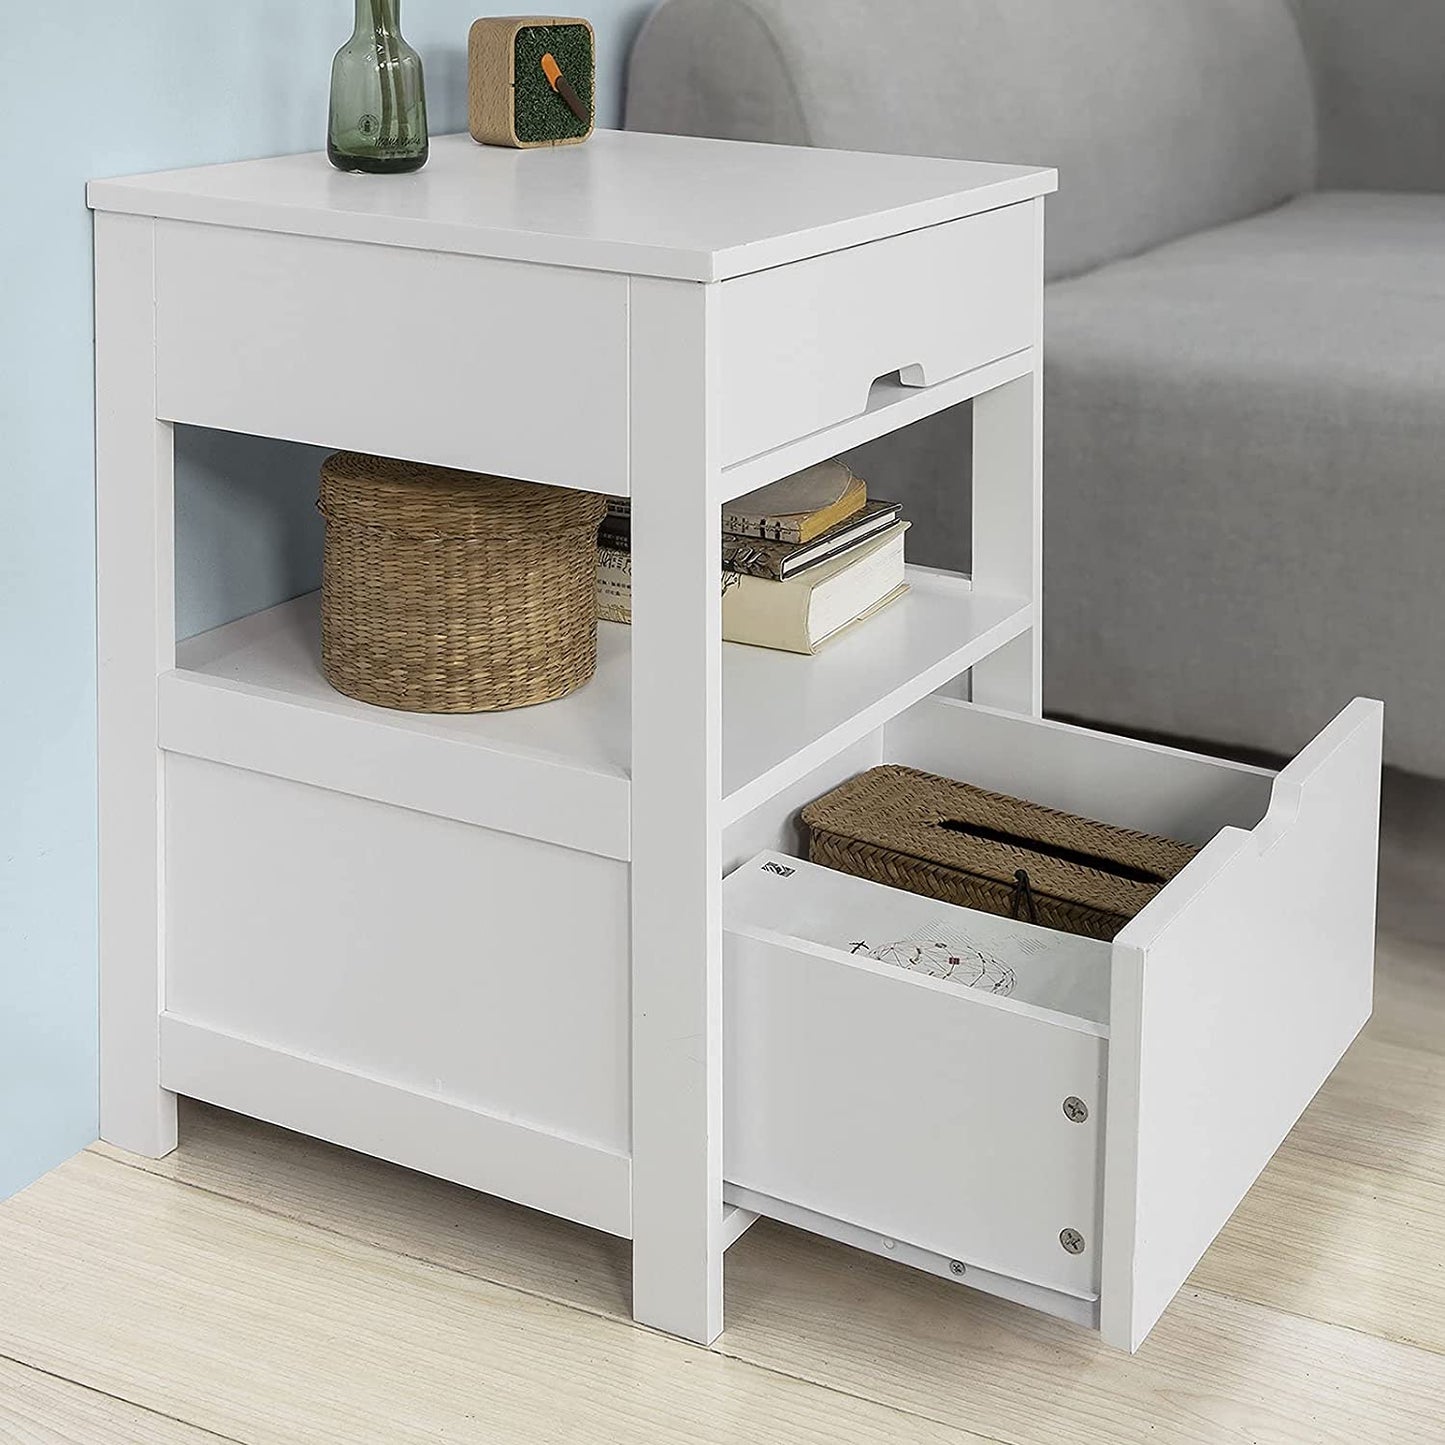 White Bedside Table with 2 Drawers - image5